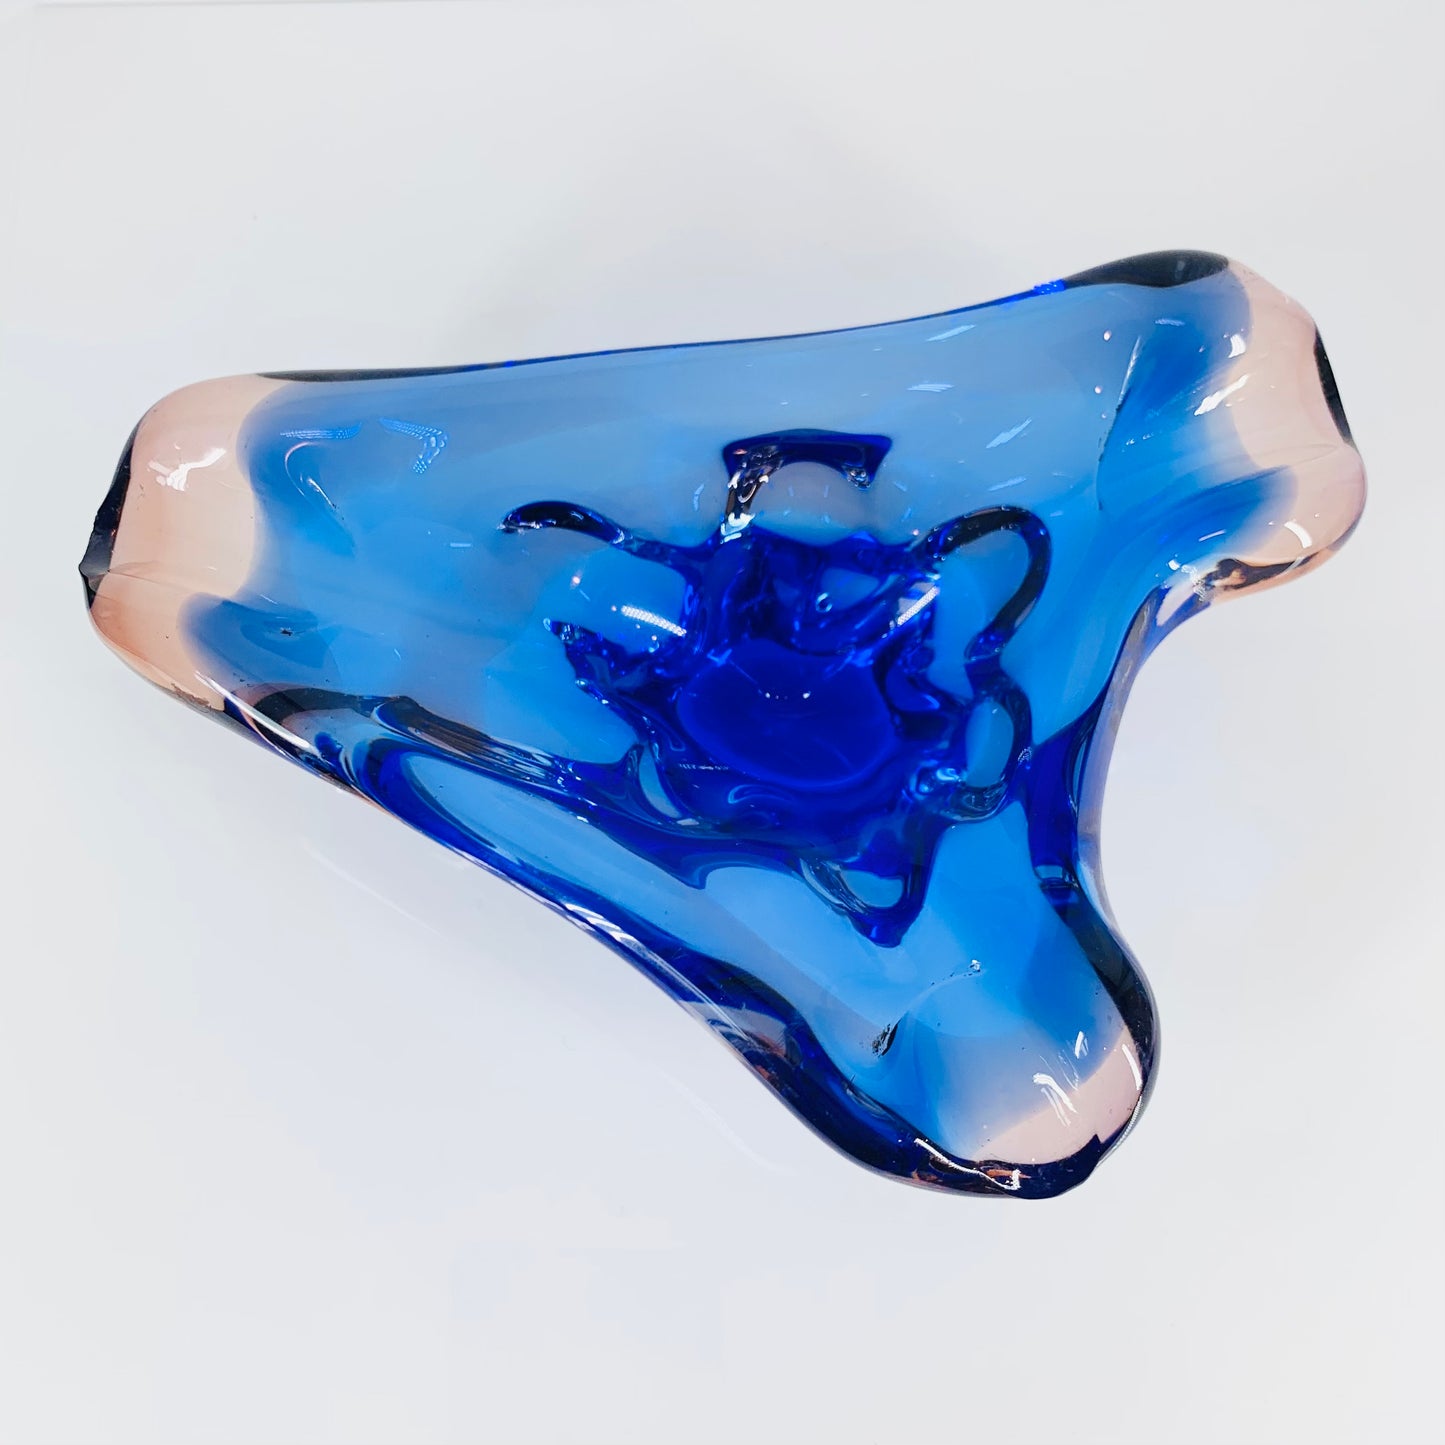 Space Age blue and rose Sklo Union glass ashtray